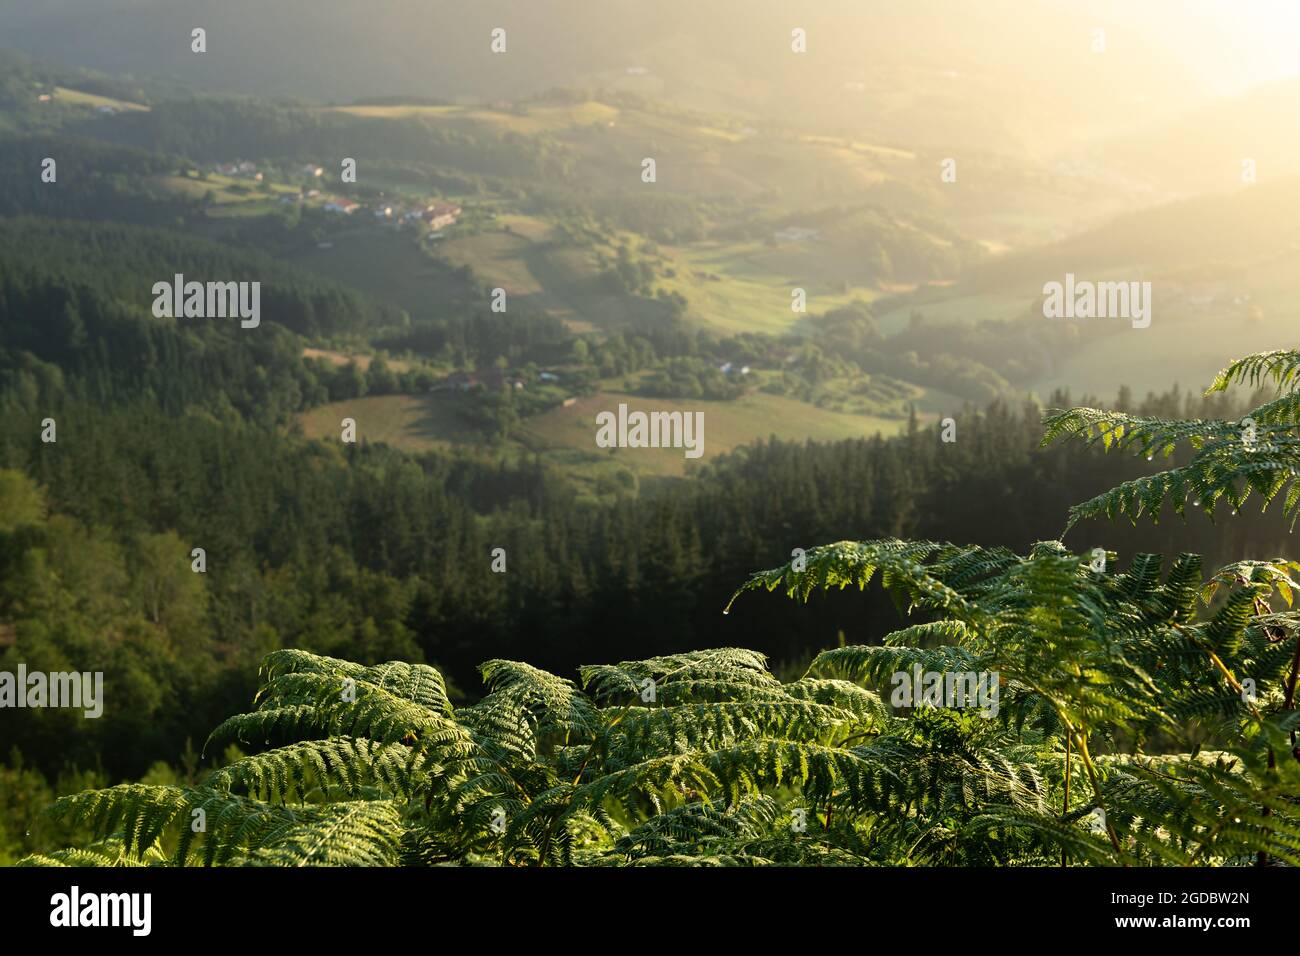 Aramaio valley at sunrise from San Cristobal chapel, Basque Country, Spain Stock Photo